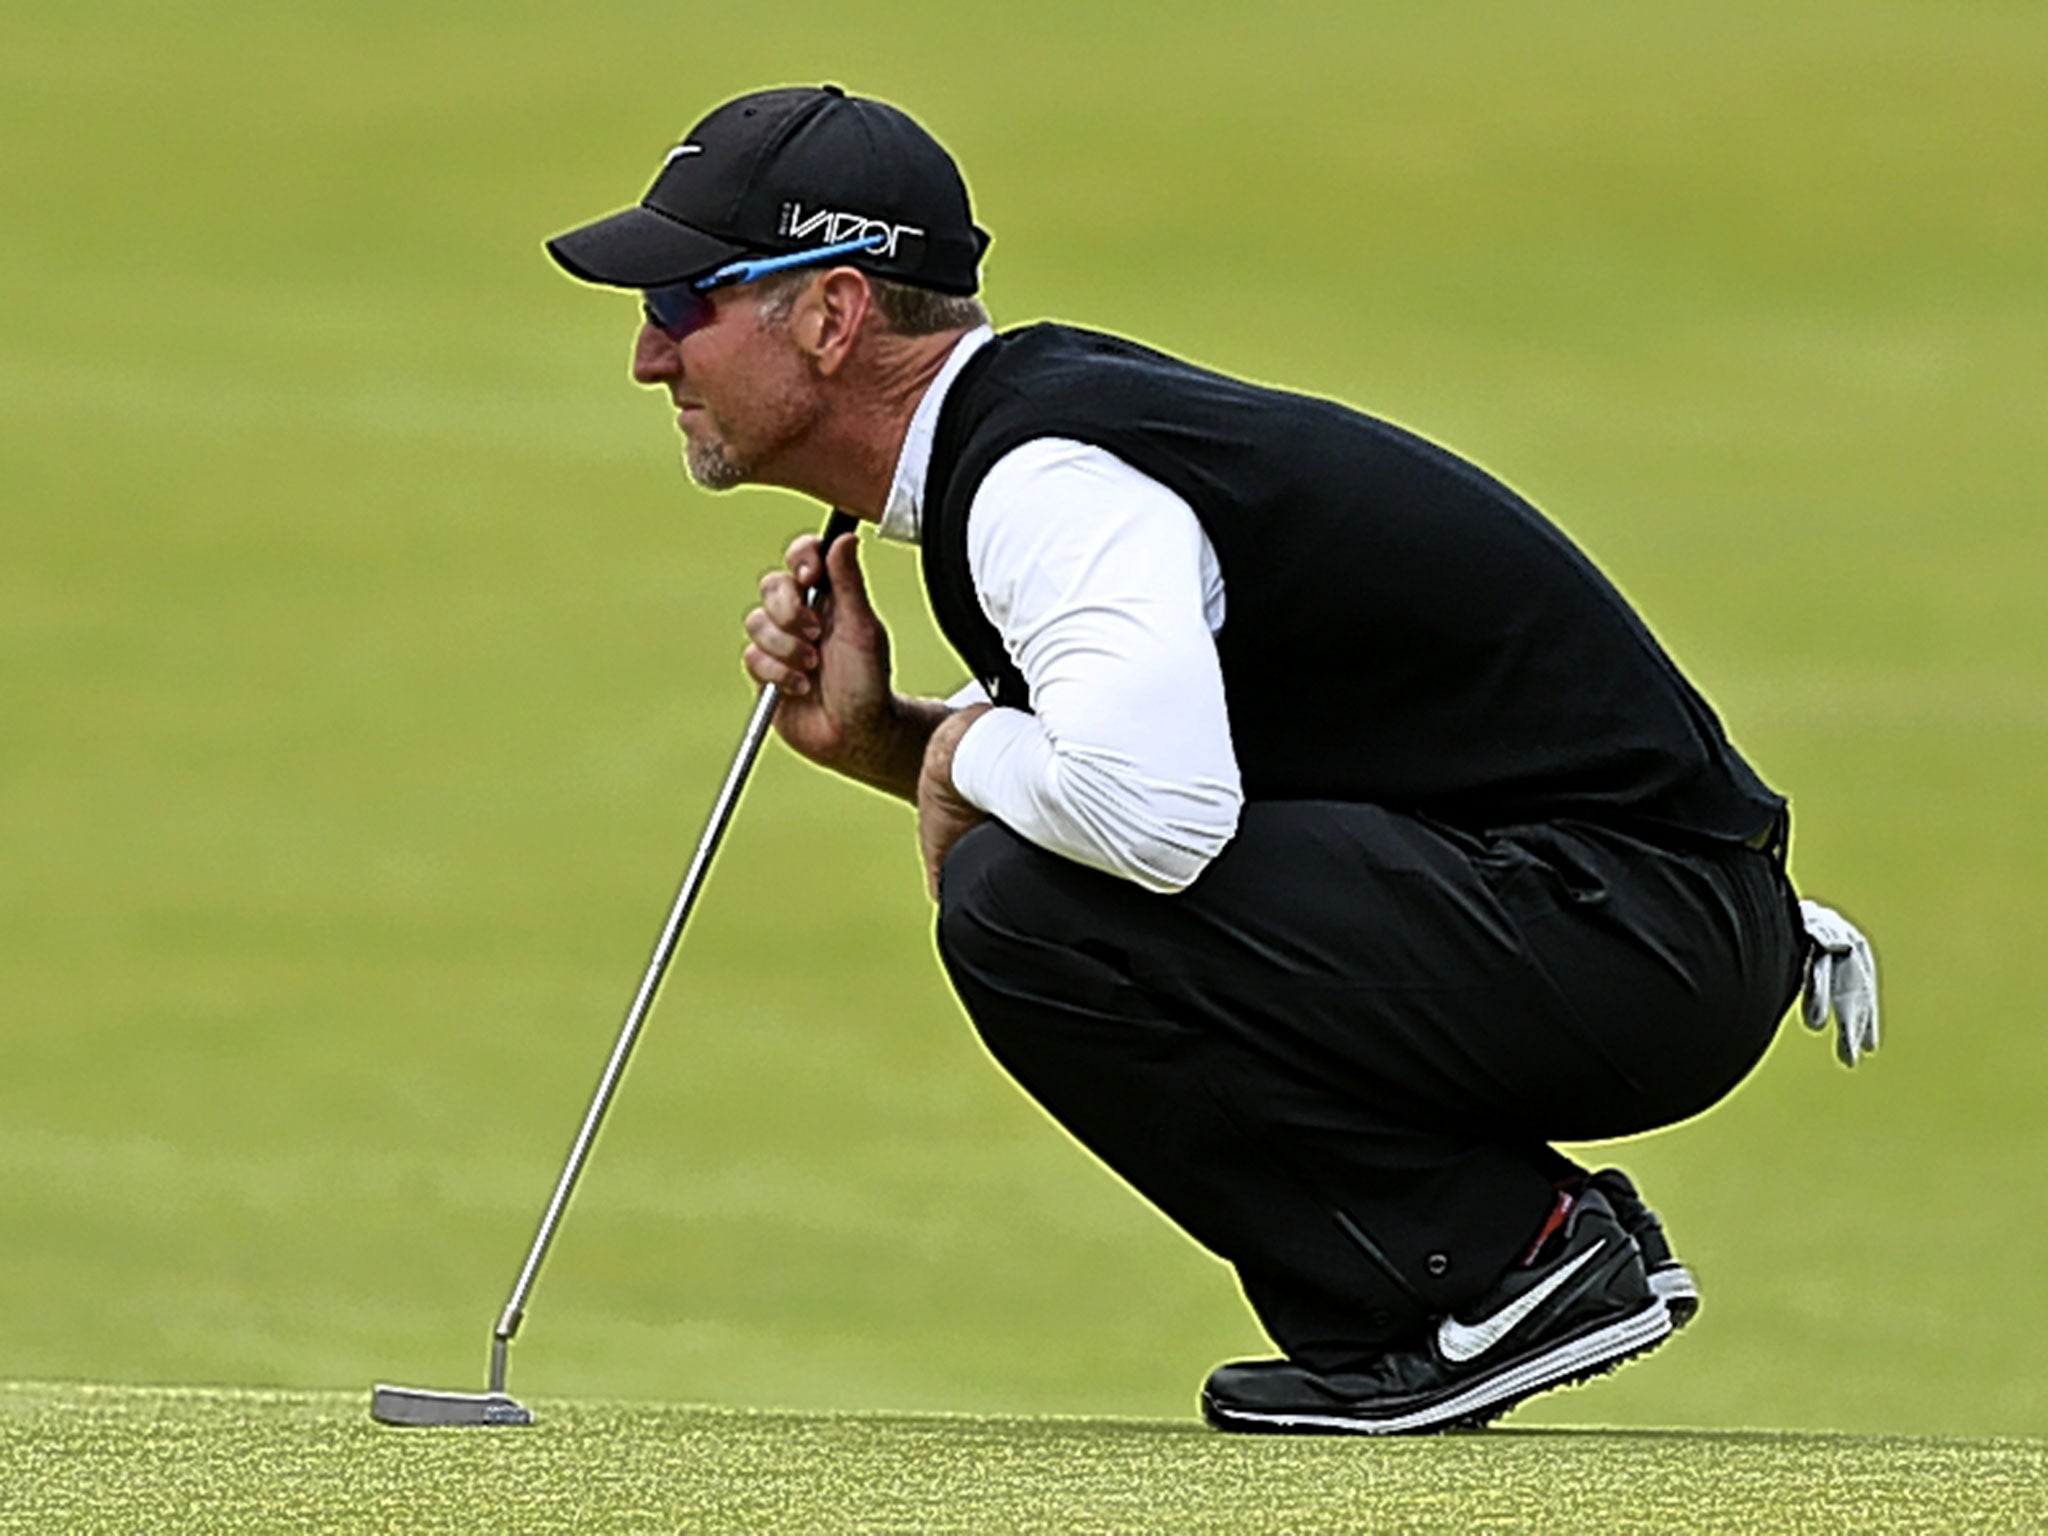 David Duval lines up a putt yesterday during his round of 67